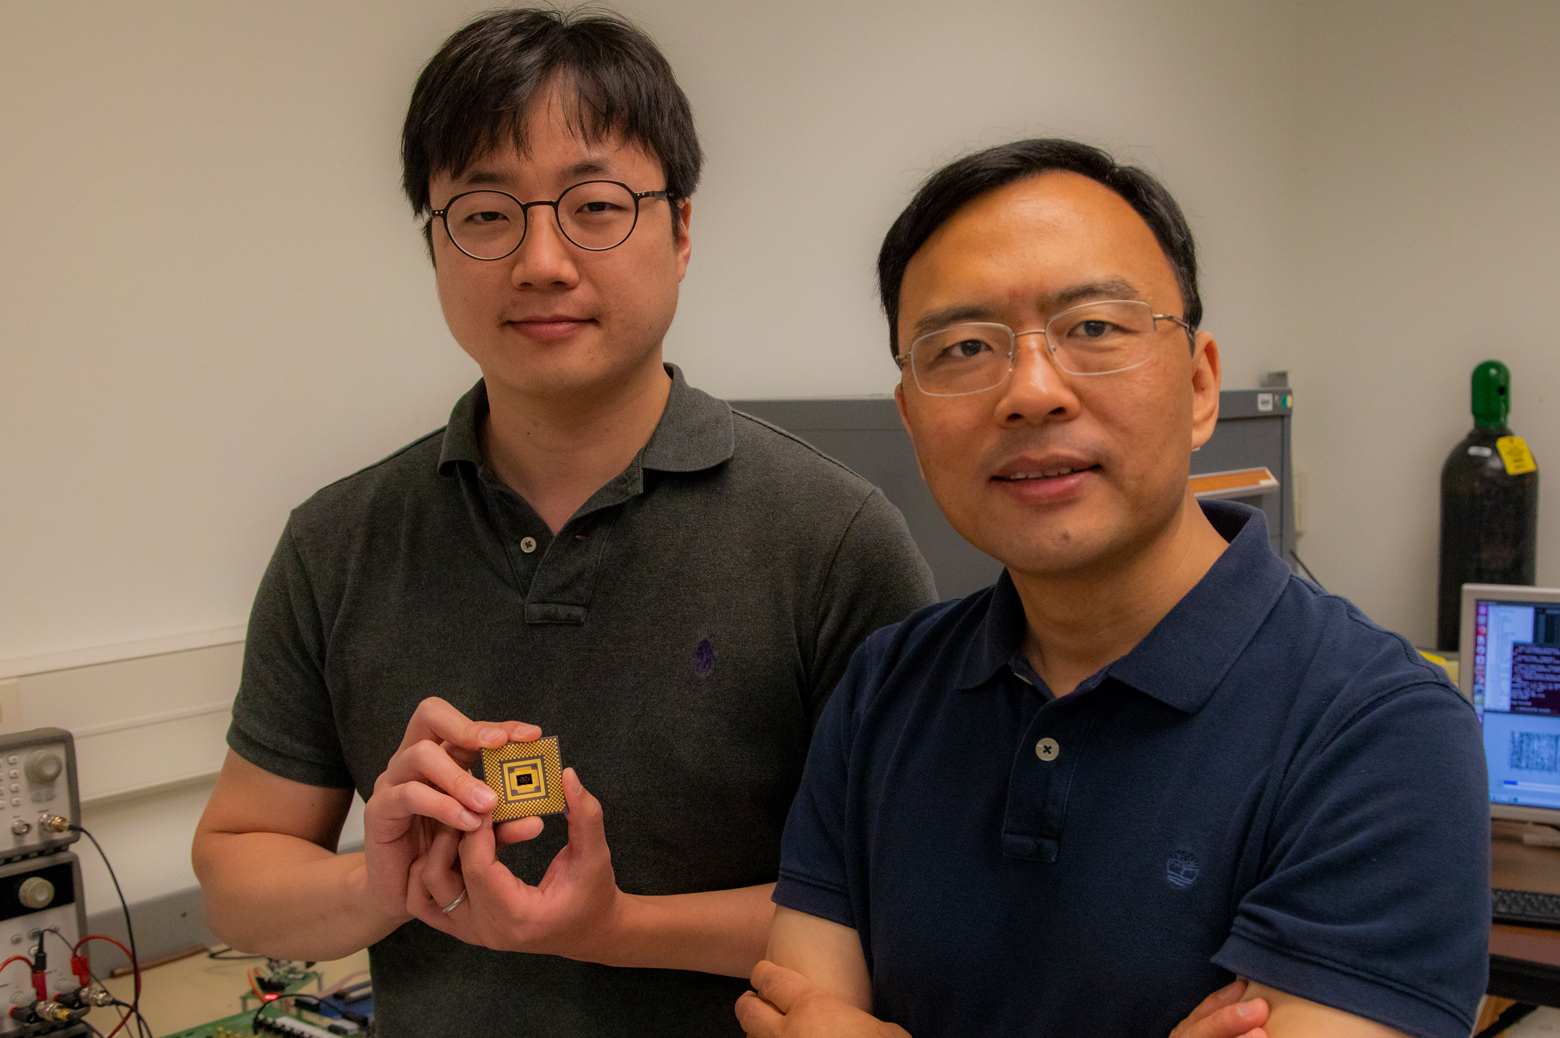 Wei Lu stands with first author Seung Hwan Lee, an electrical engineering PhD student, who holds the memristor array. Photo: Robert Coelius, Michigan Engineering Communications & Marketing